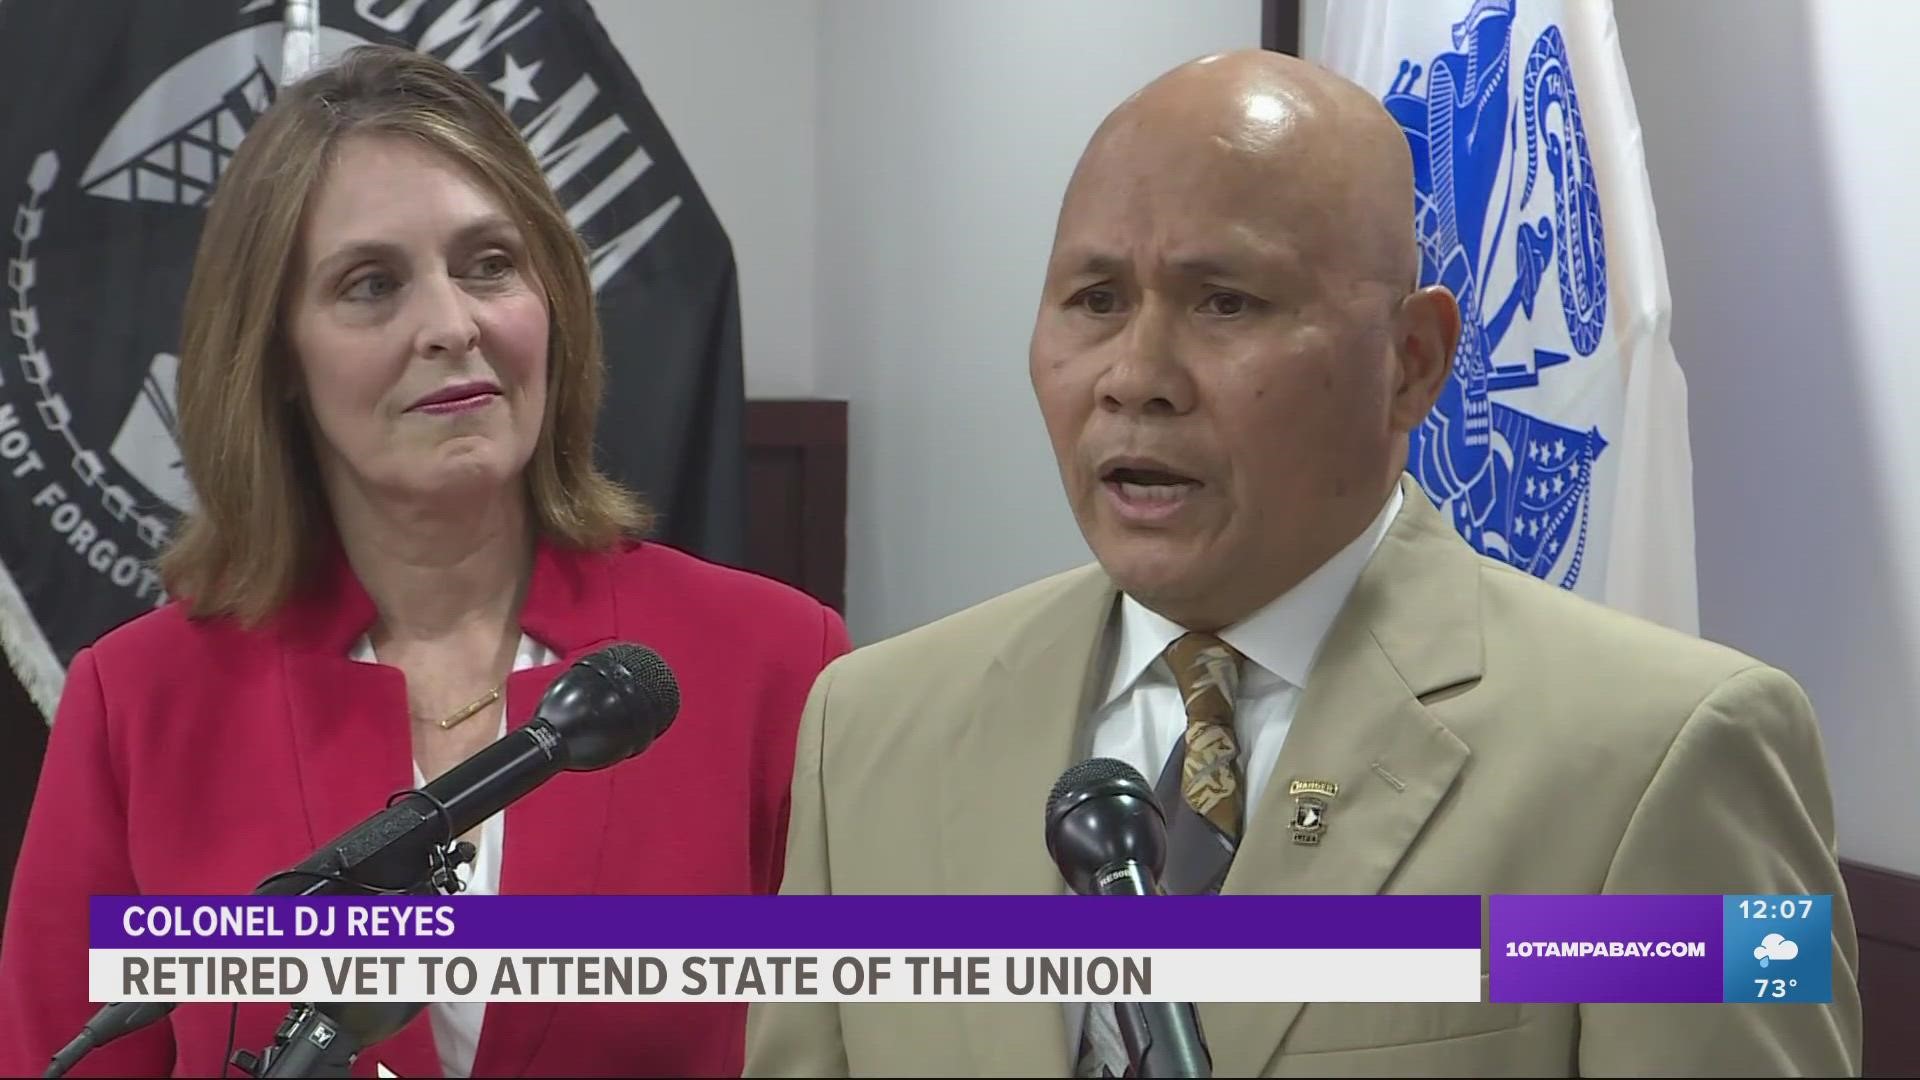 U.S. representative Kathy Castor announced that Colonel DJ Reyes will join her in Washington this coming Tuesday as President Biden addresses the nation.